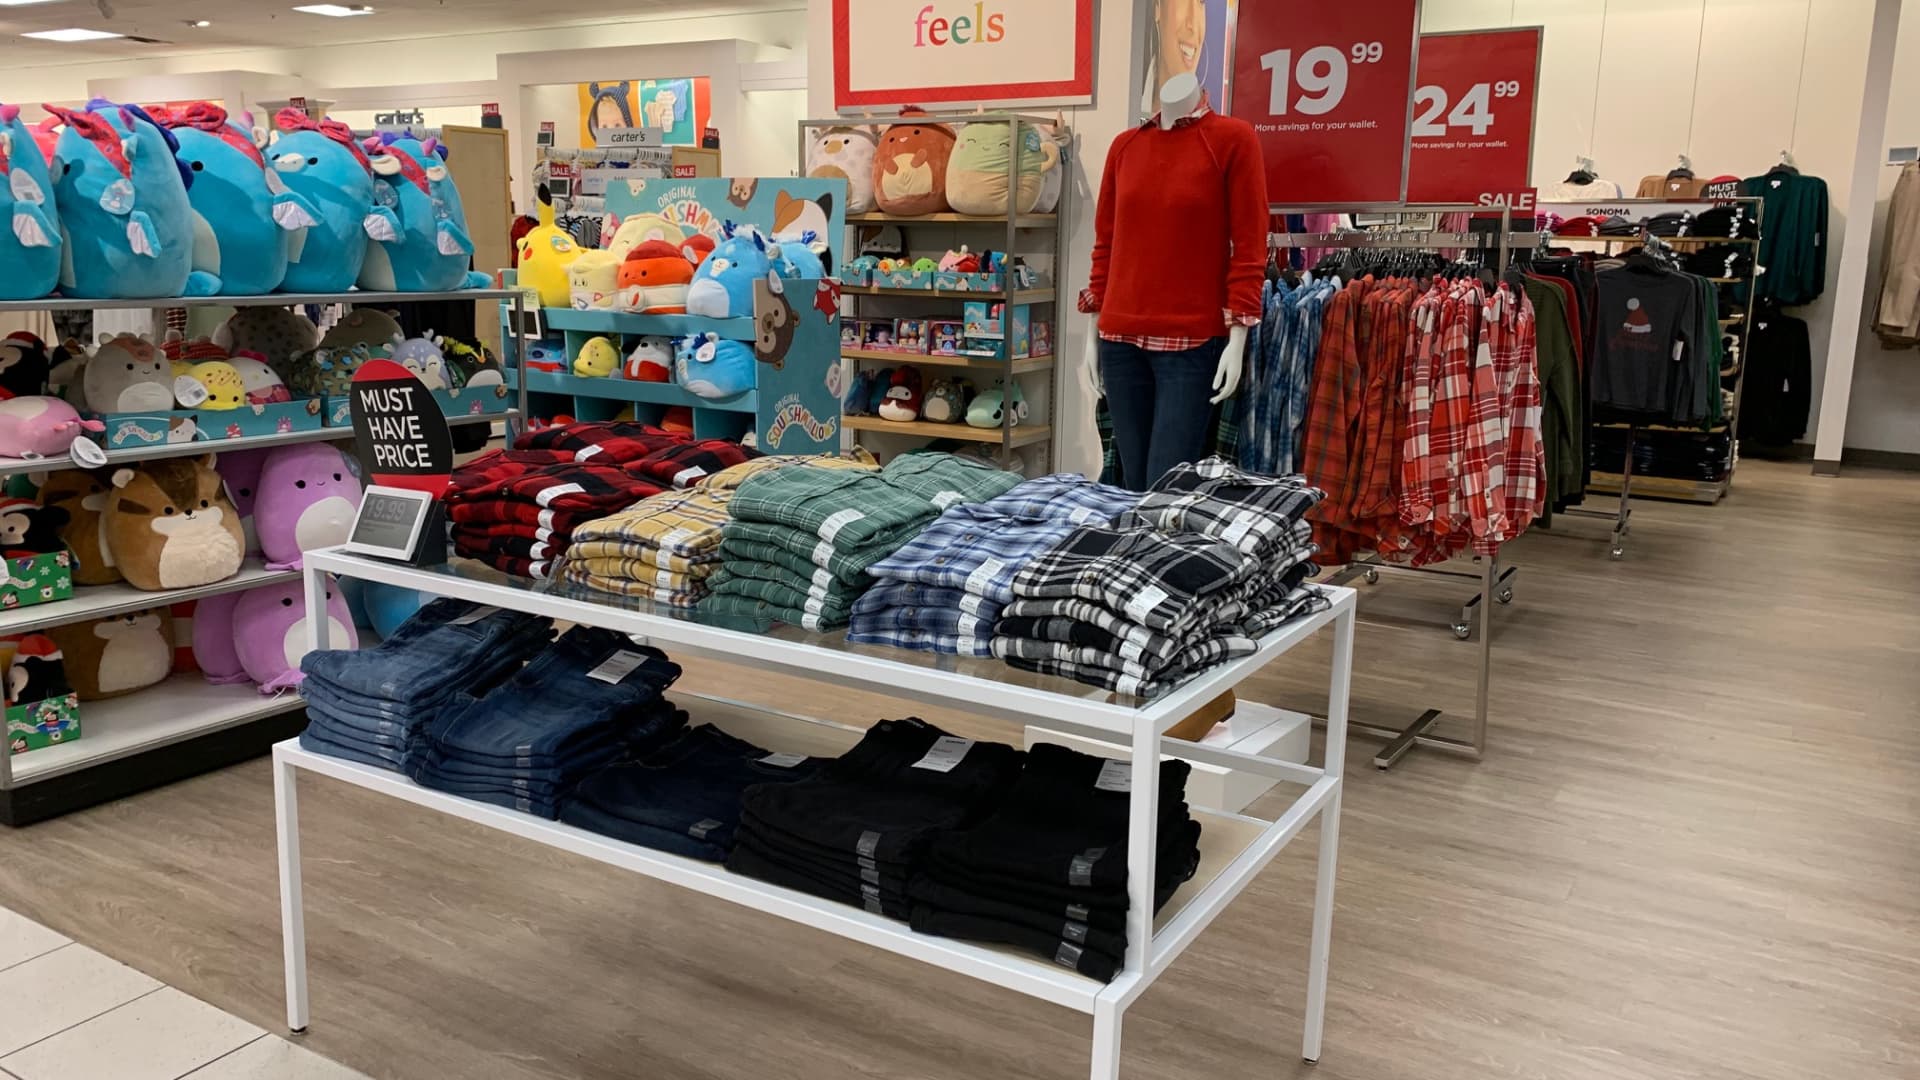 Kohl’s holiday look offers glimpse into turnaround plan